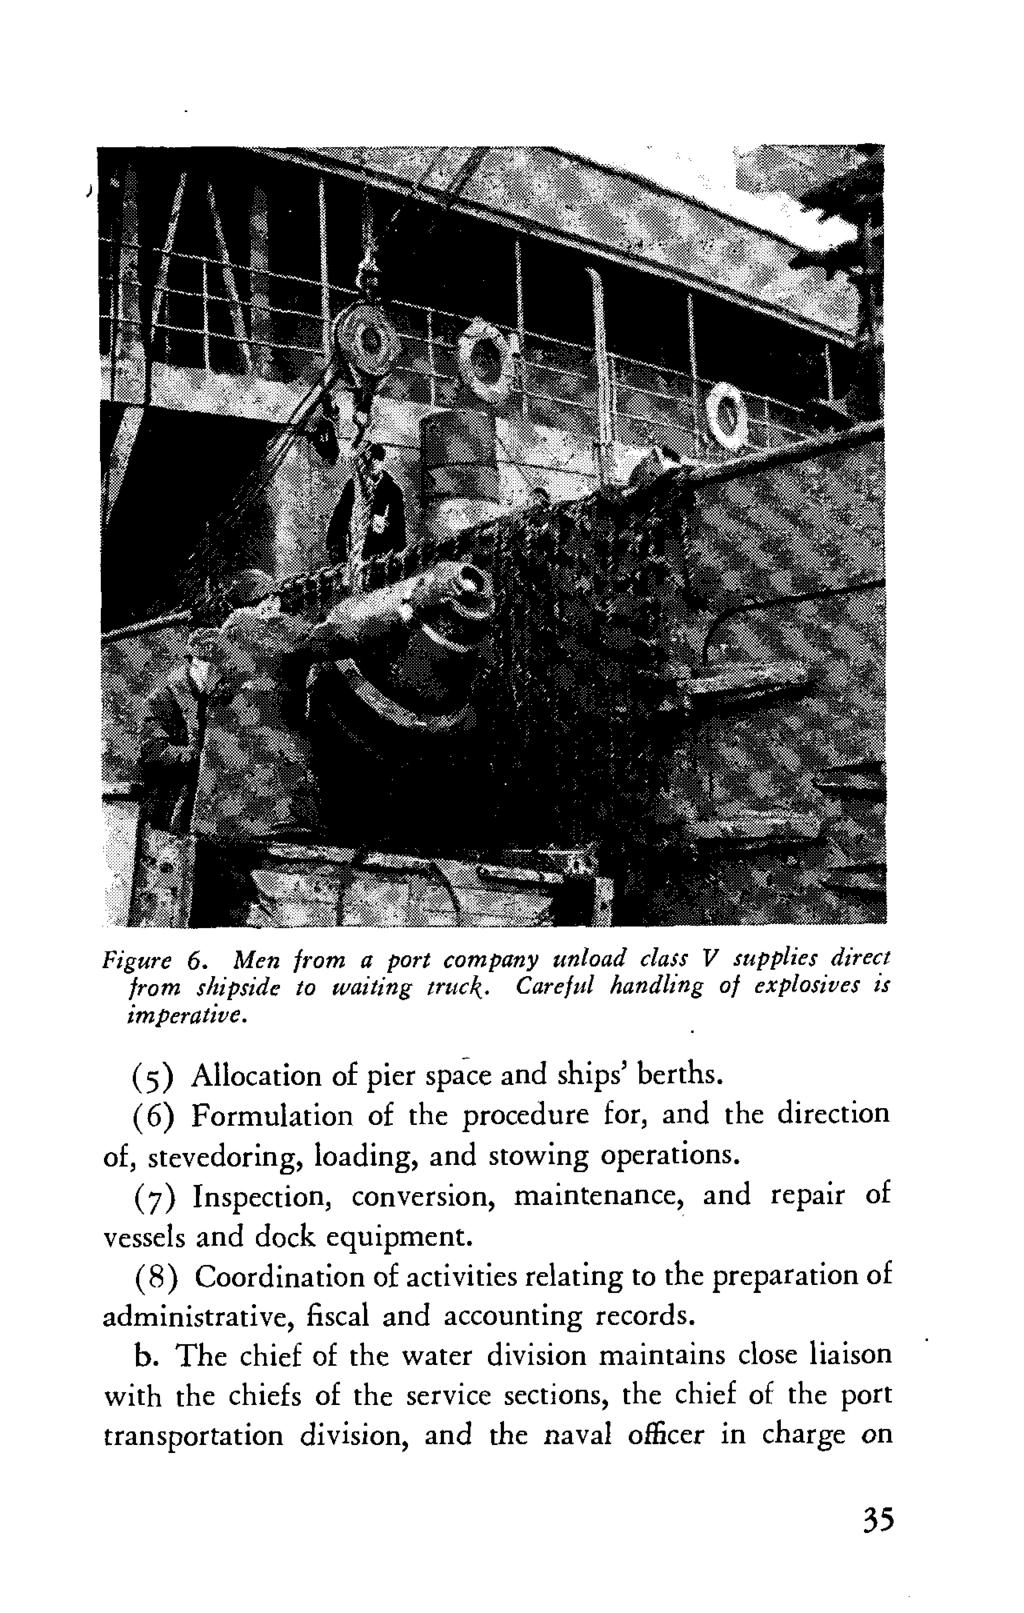 Figure 6. Men from a port company unload class V supplies direct from shipside to waiting truck. Careful handling of explosives is imperative. (5) Allocation of pier space and ships' berths.